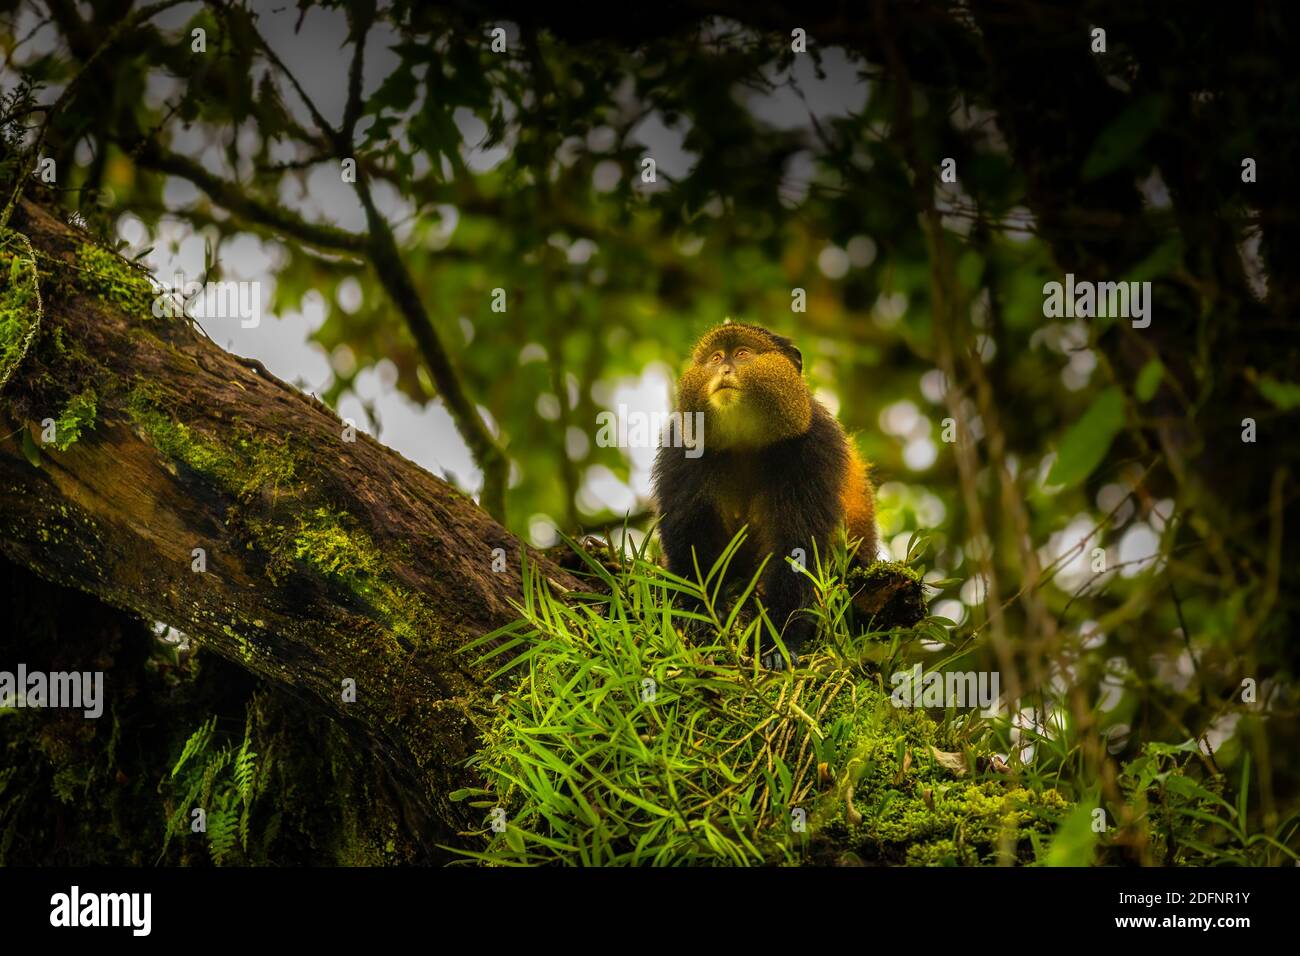 Wild and very rare golden monkey ( Cercopithecus kandti) in the rainforest. Unique and endangered animal close up in nature habitat. Stock Photo